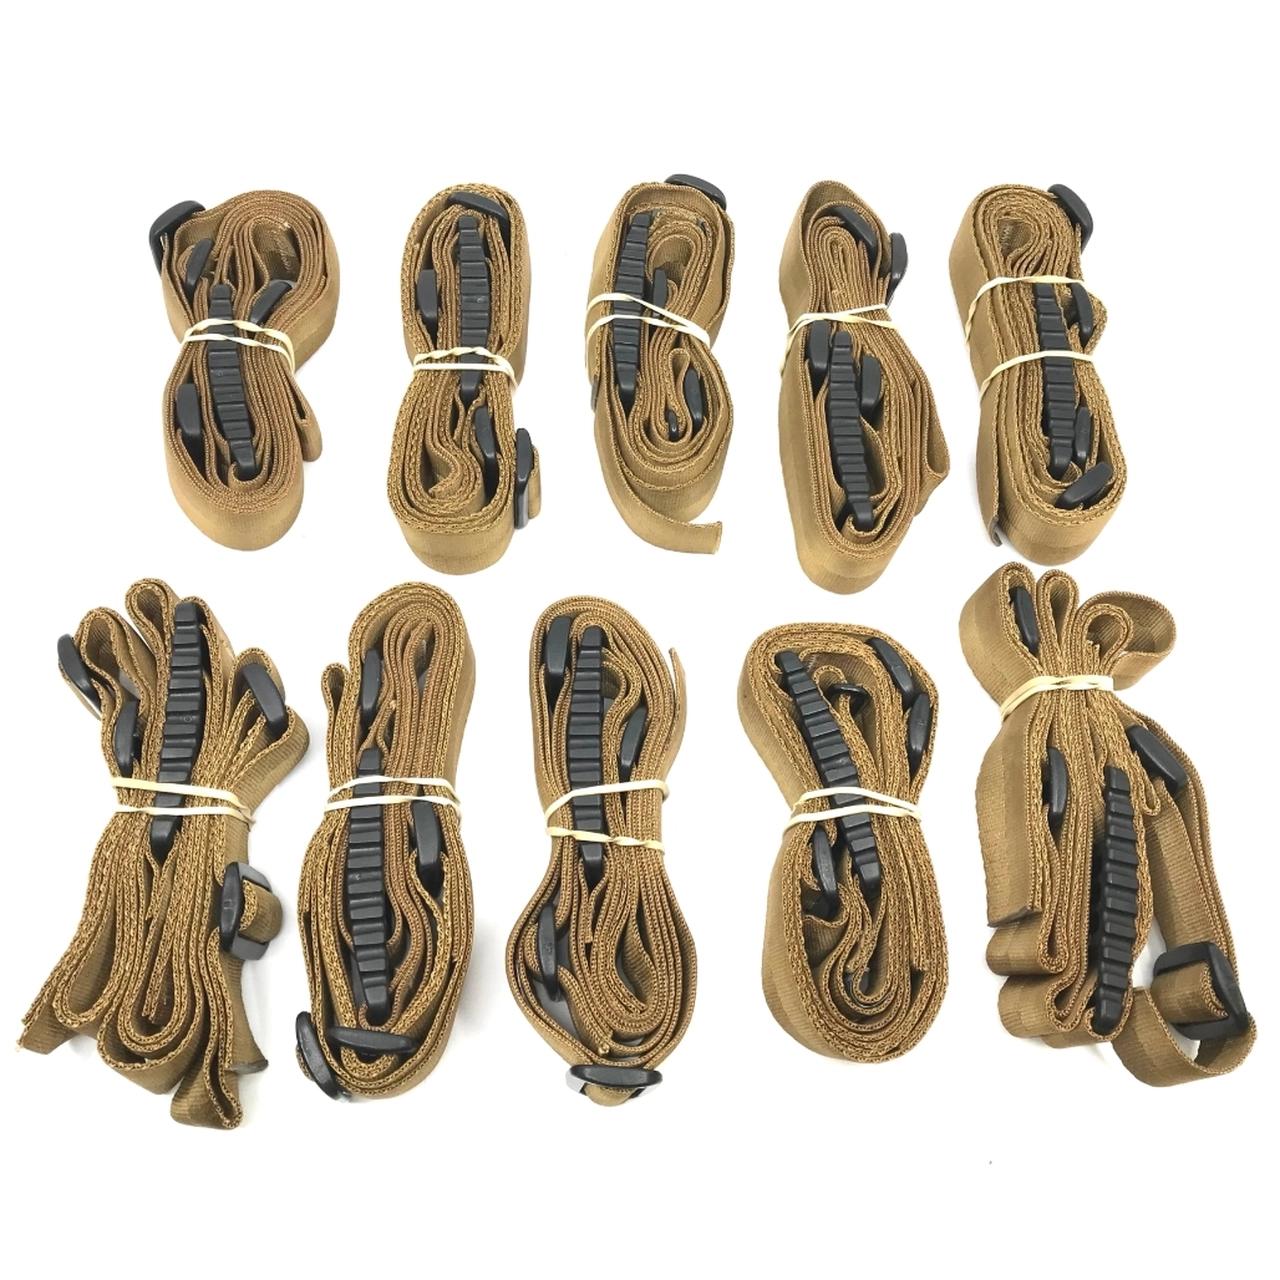 Open Box Govt. Contract Overrun Two Point Sling Lot Of 10 Pcs. Coyote Tan - $49.98